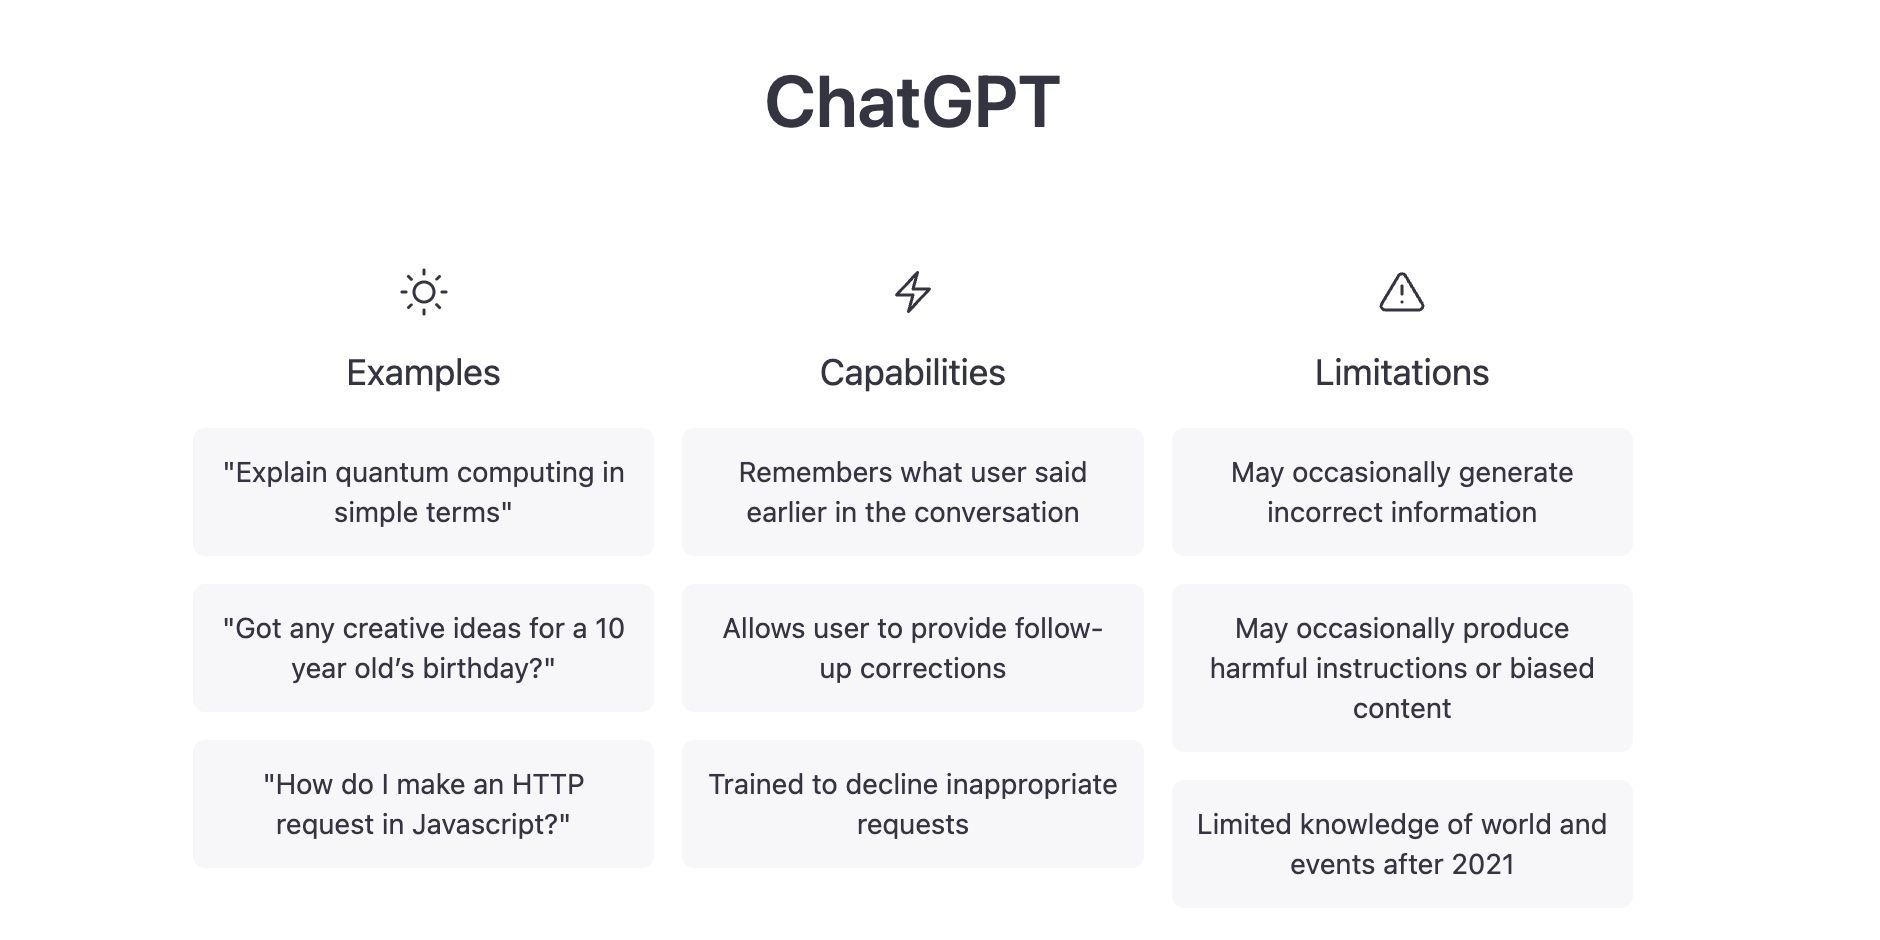 Screenshot of the ChatGPT landing page with a list of example prompts along with their capabilities and limitations